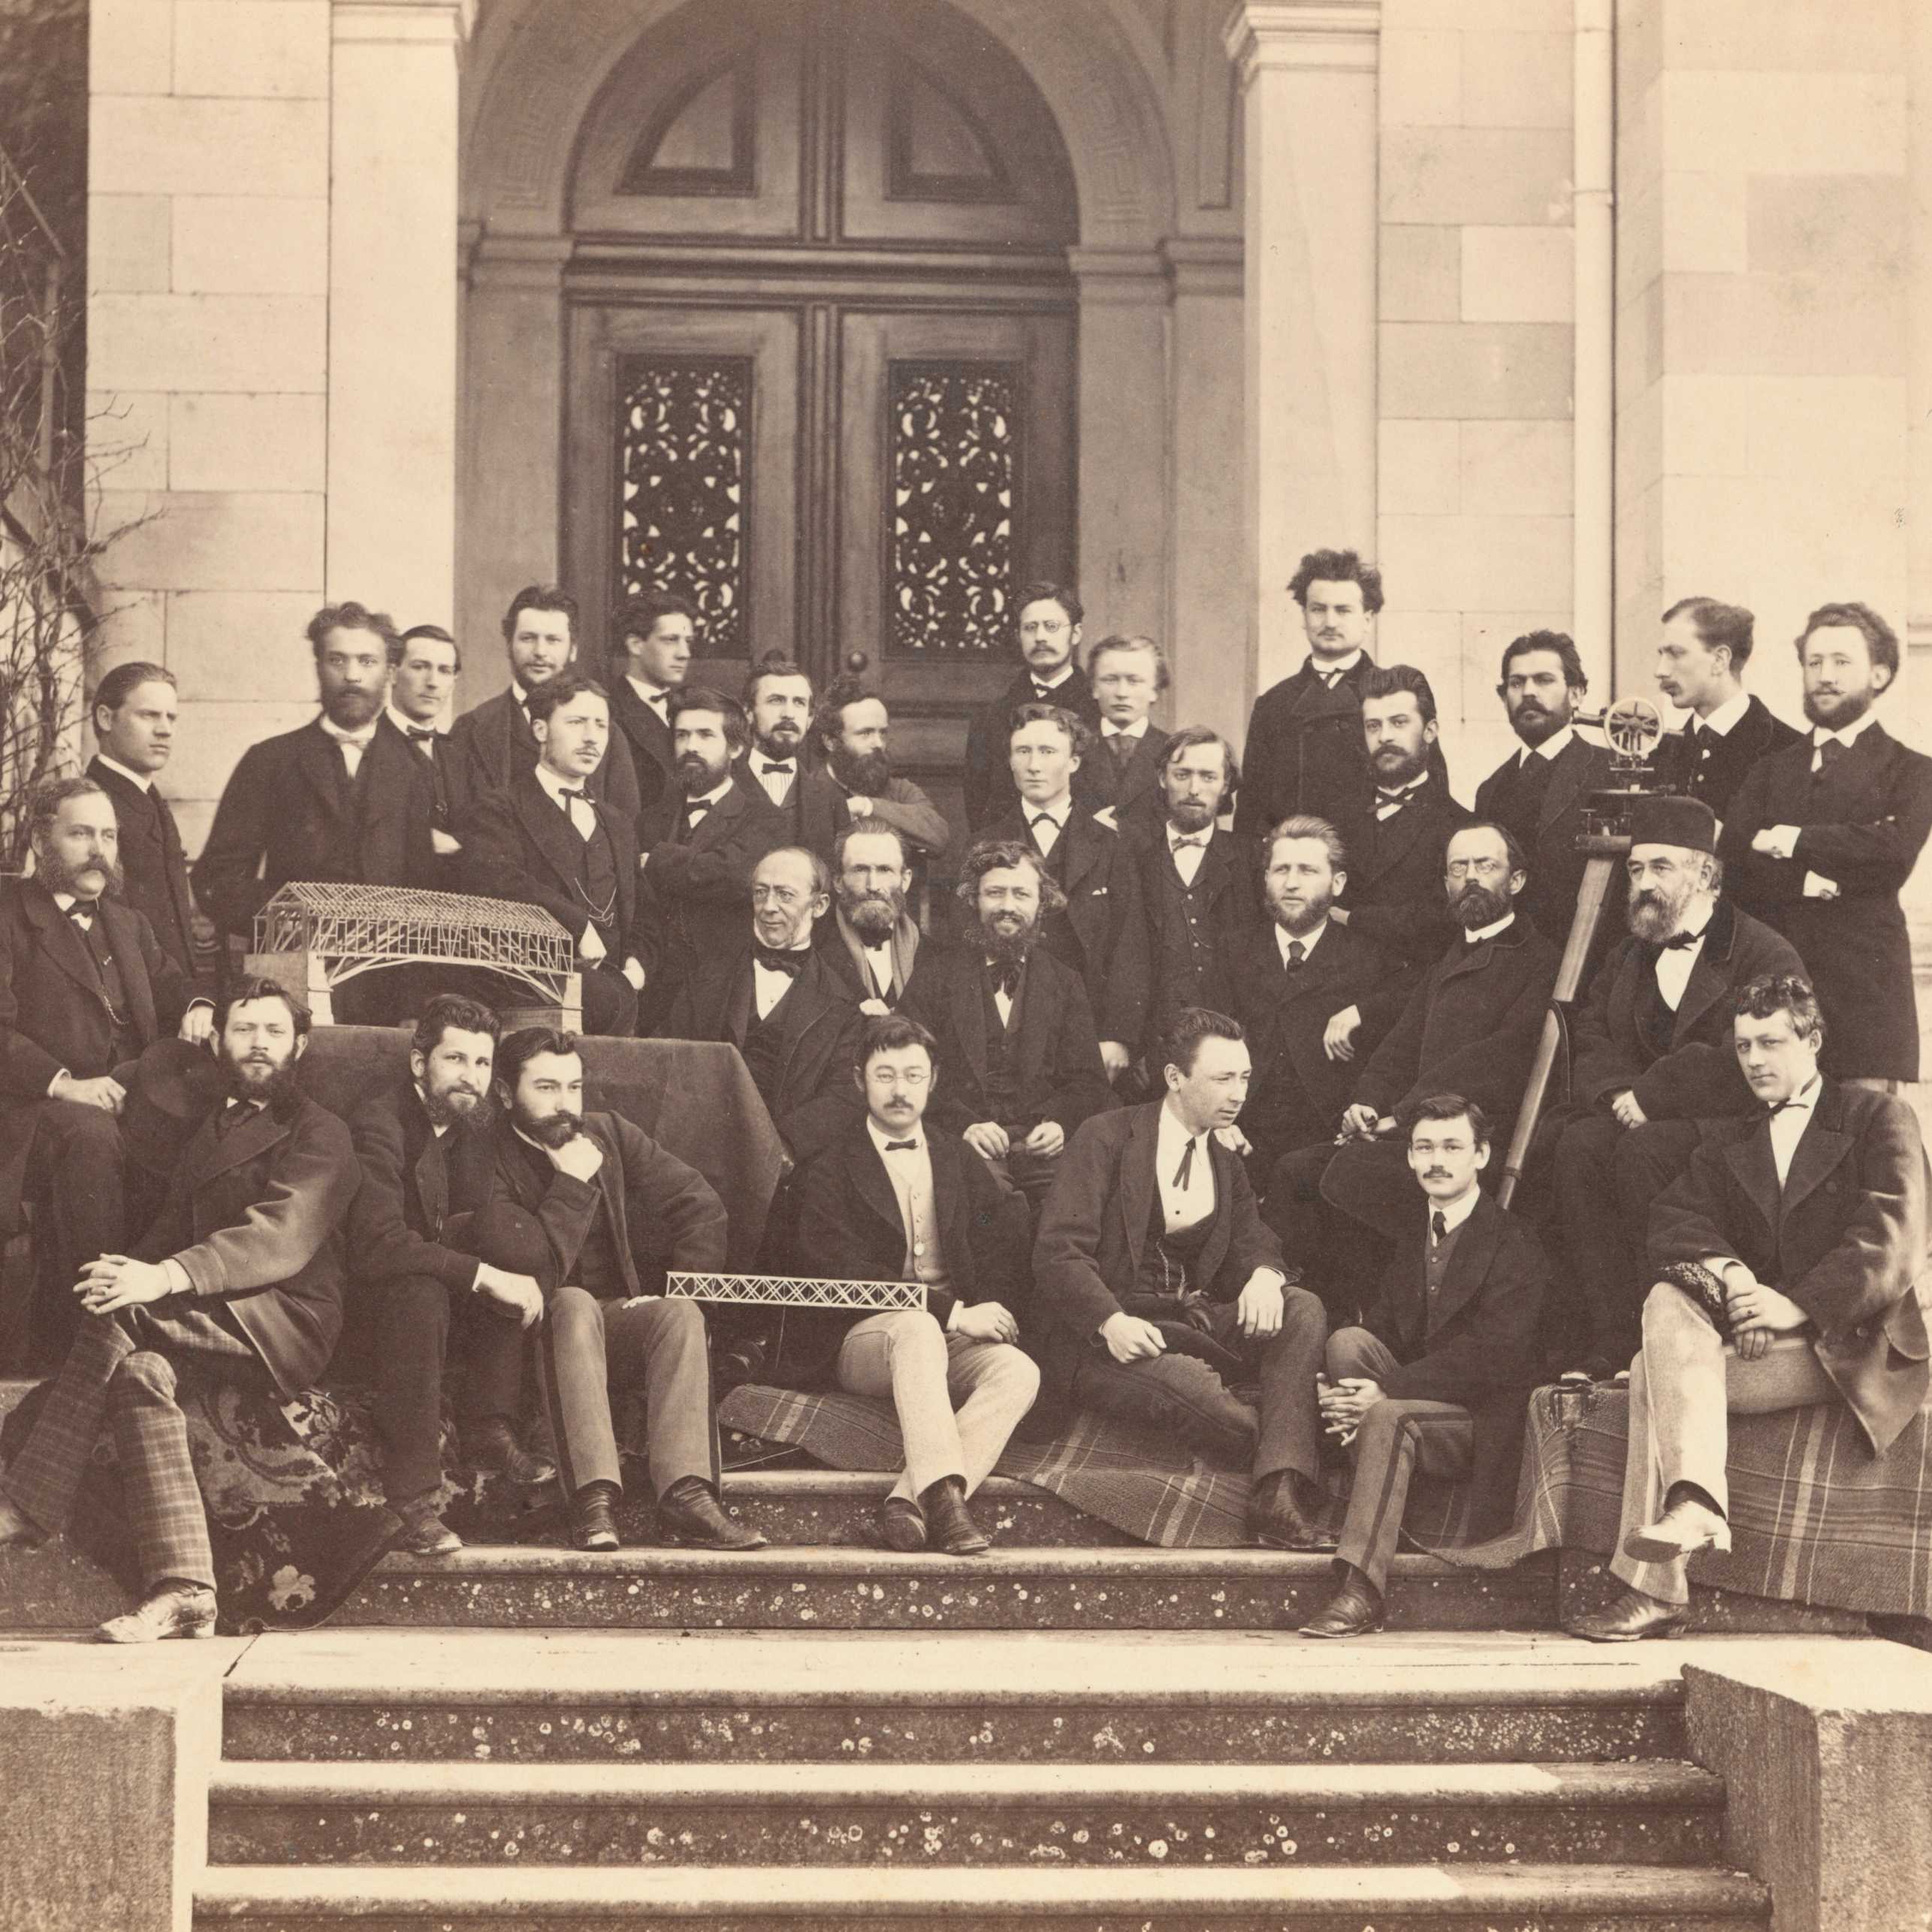 High performers of the future: students of the Federal Polytechnic School at around 1870.